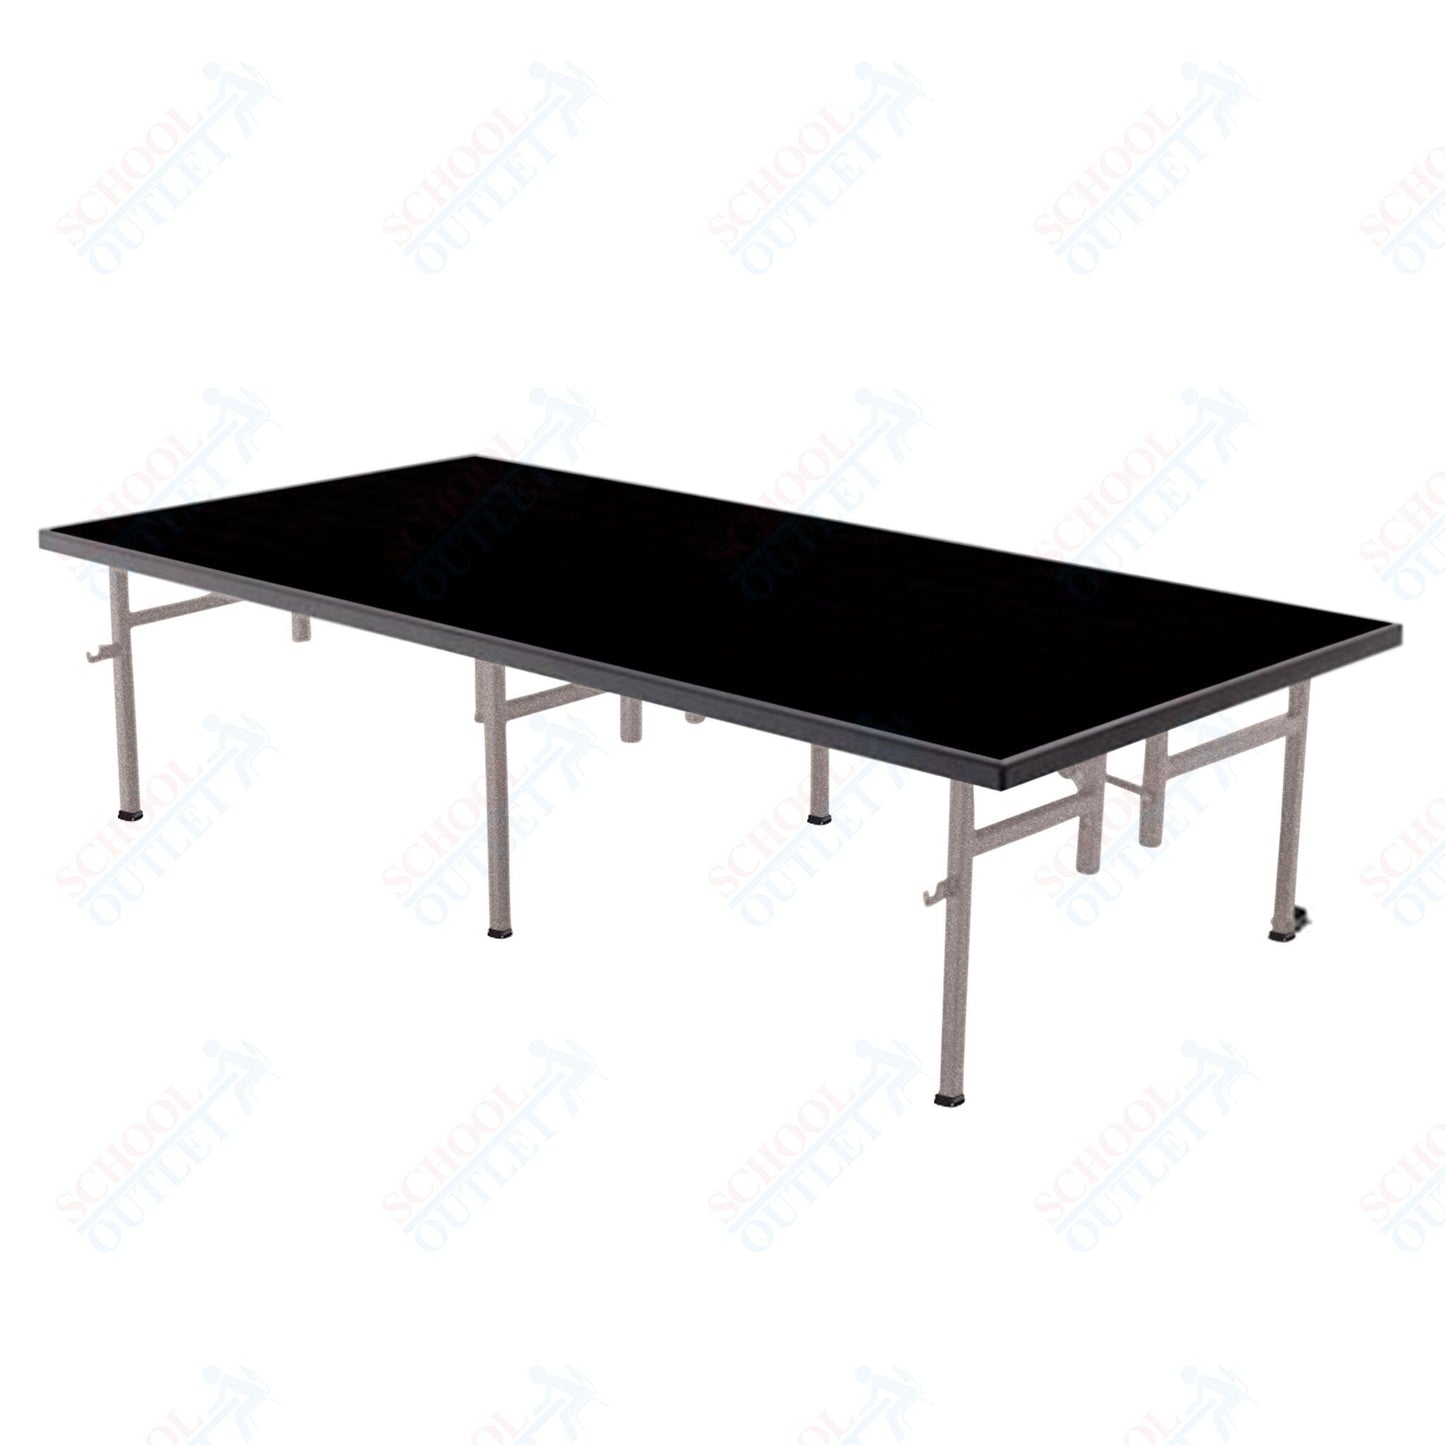 AmTab Fixed Height Stage - Polypropylene Top - 48"W x 48"L x 8"H (AmTab AMT - ST4408P) - SchoolOutlet